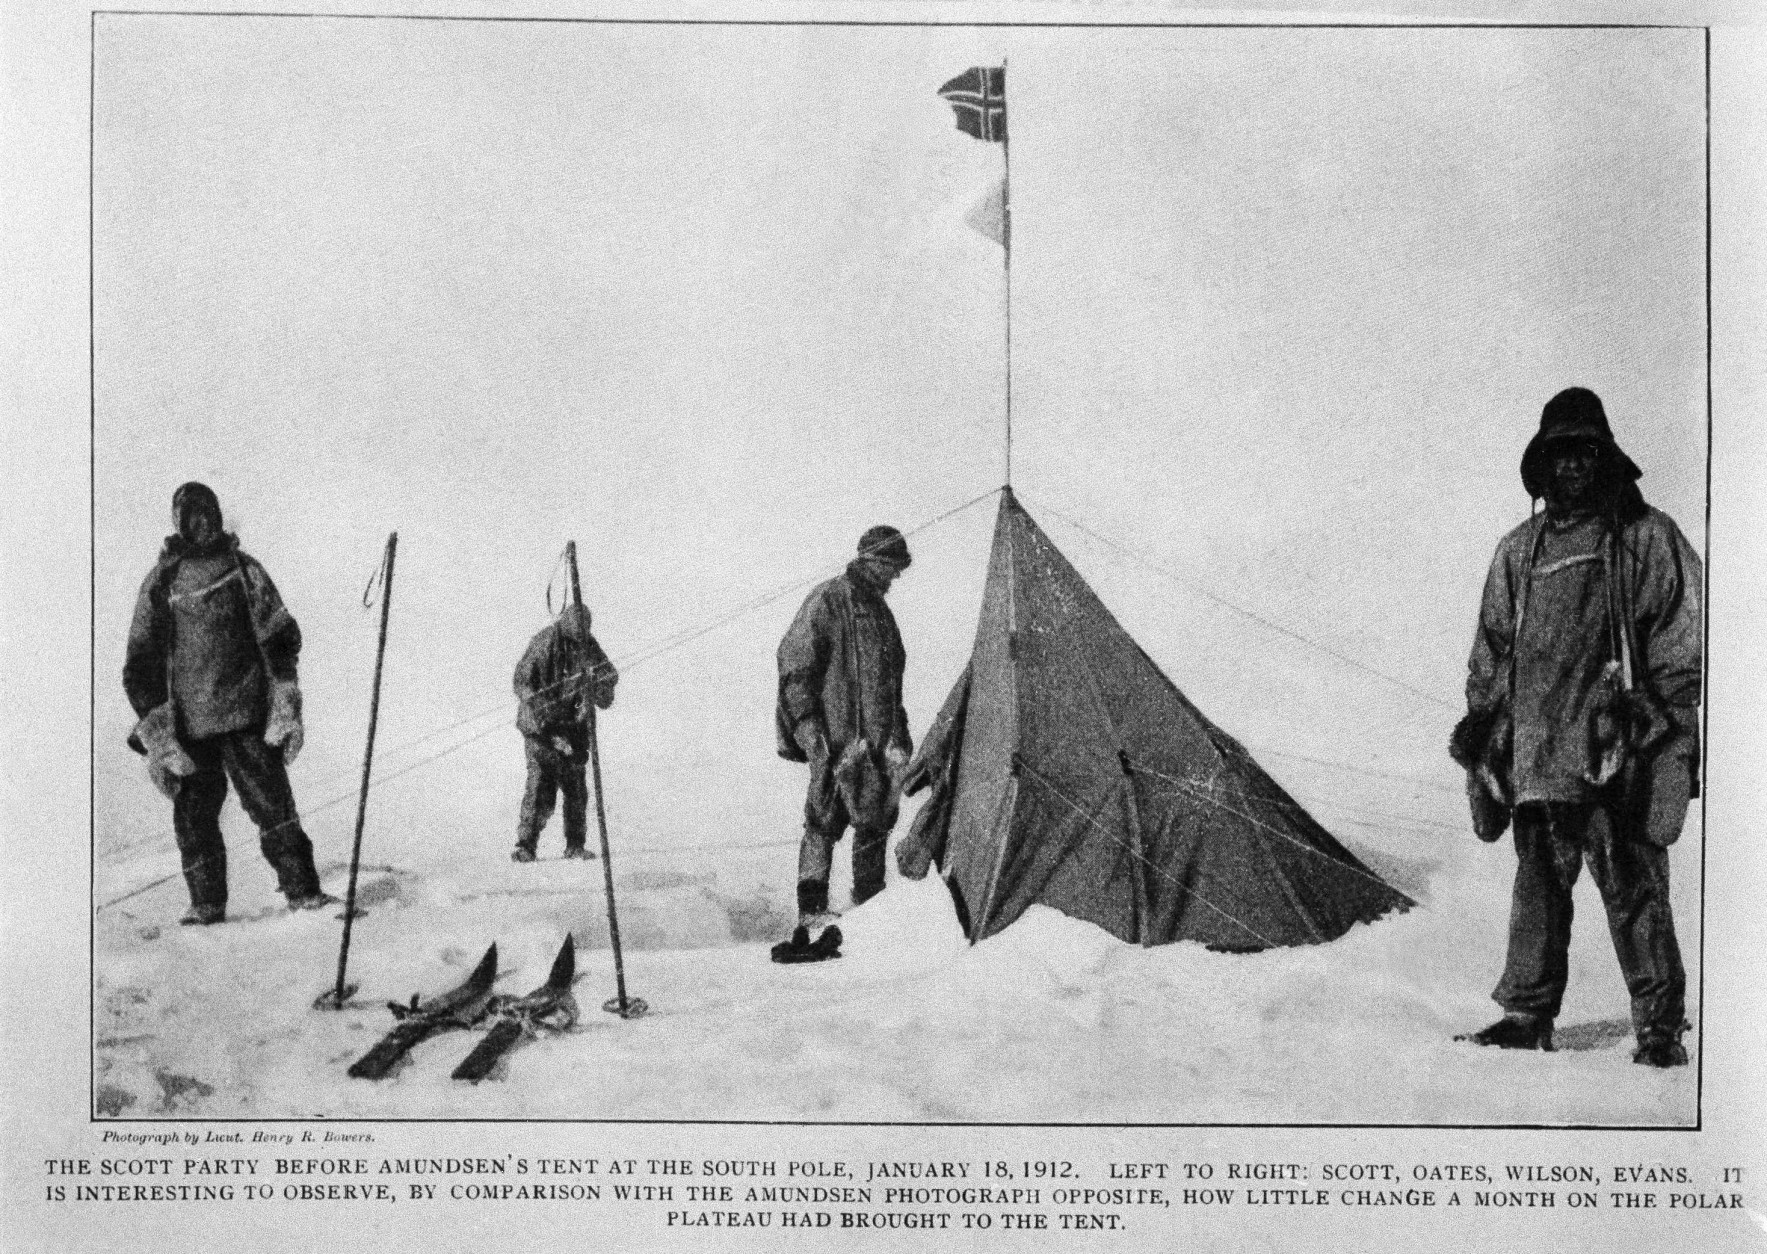 The Scott Party before Roald Amundsen's tent at the South Pole, Jan. 18, 1912. From left to right: Robert Falcon Scott, Captain Lawrence Oates, Edward Adrian Wilson, and Edgar Evans. Picture taken before Scott party left for the Pole. From "The Voyage of Discovery" by Robert F. Scott. (AP Photo)